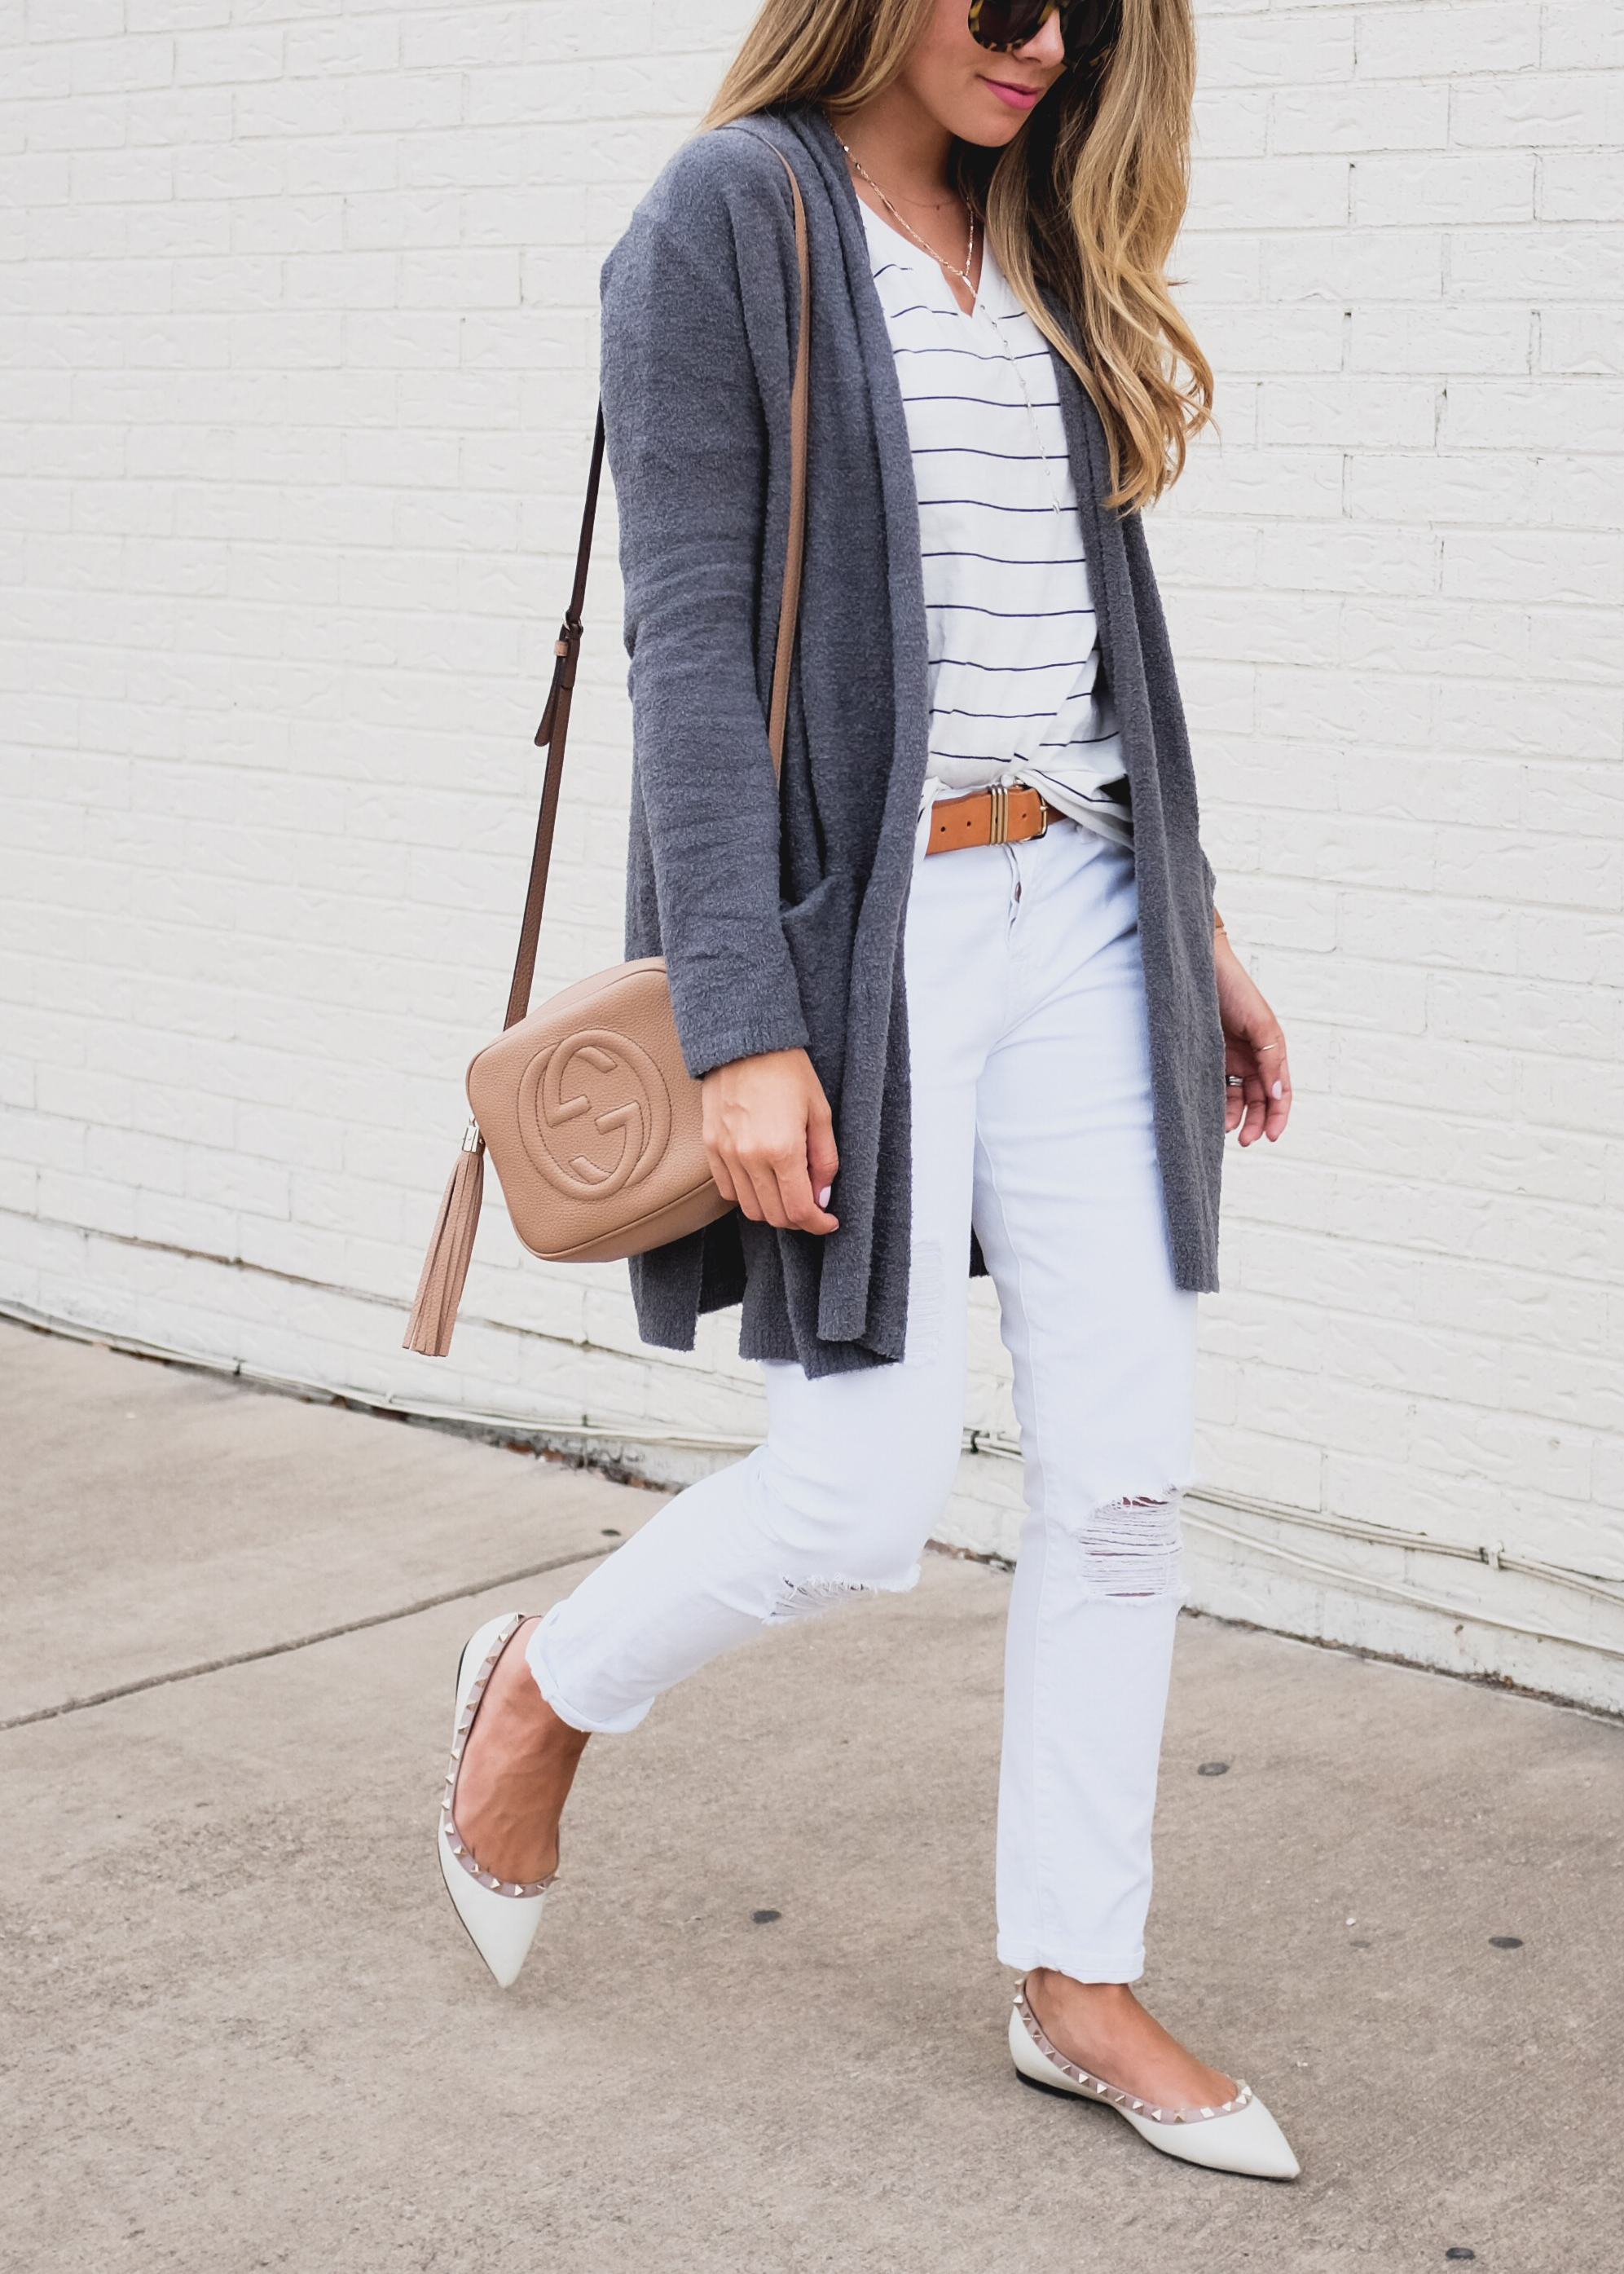 Grey Cardigan and White Pants 